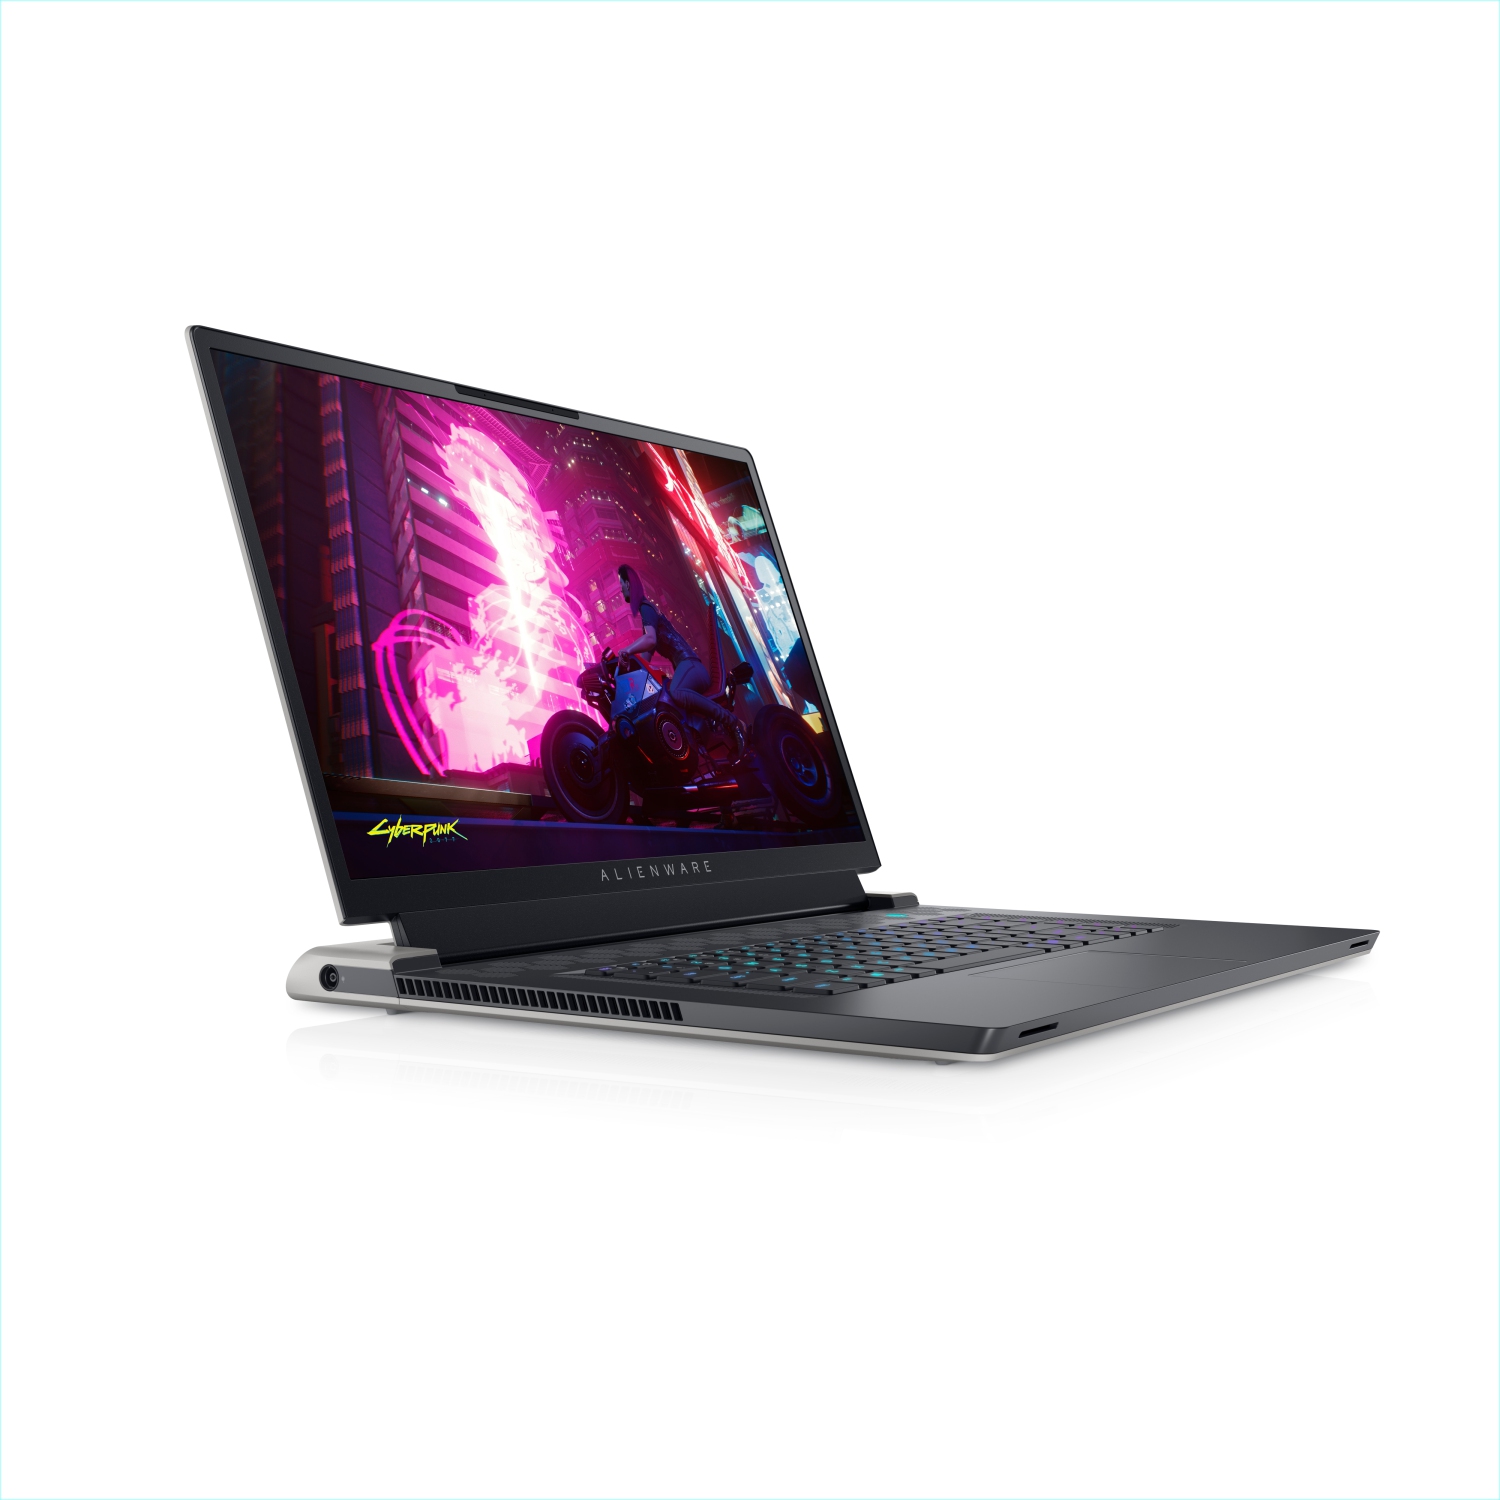 Refurbished (Excellent) - Dell Alienware X17 R1 Gaming Laptop (2021), 17.3" 4K, Core i9, 1TB SSD + 1TB SSD, 32GB RAM, RTX 3080, 8 Cores @ 5 GHz, 11th Gen CPU Certified